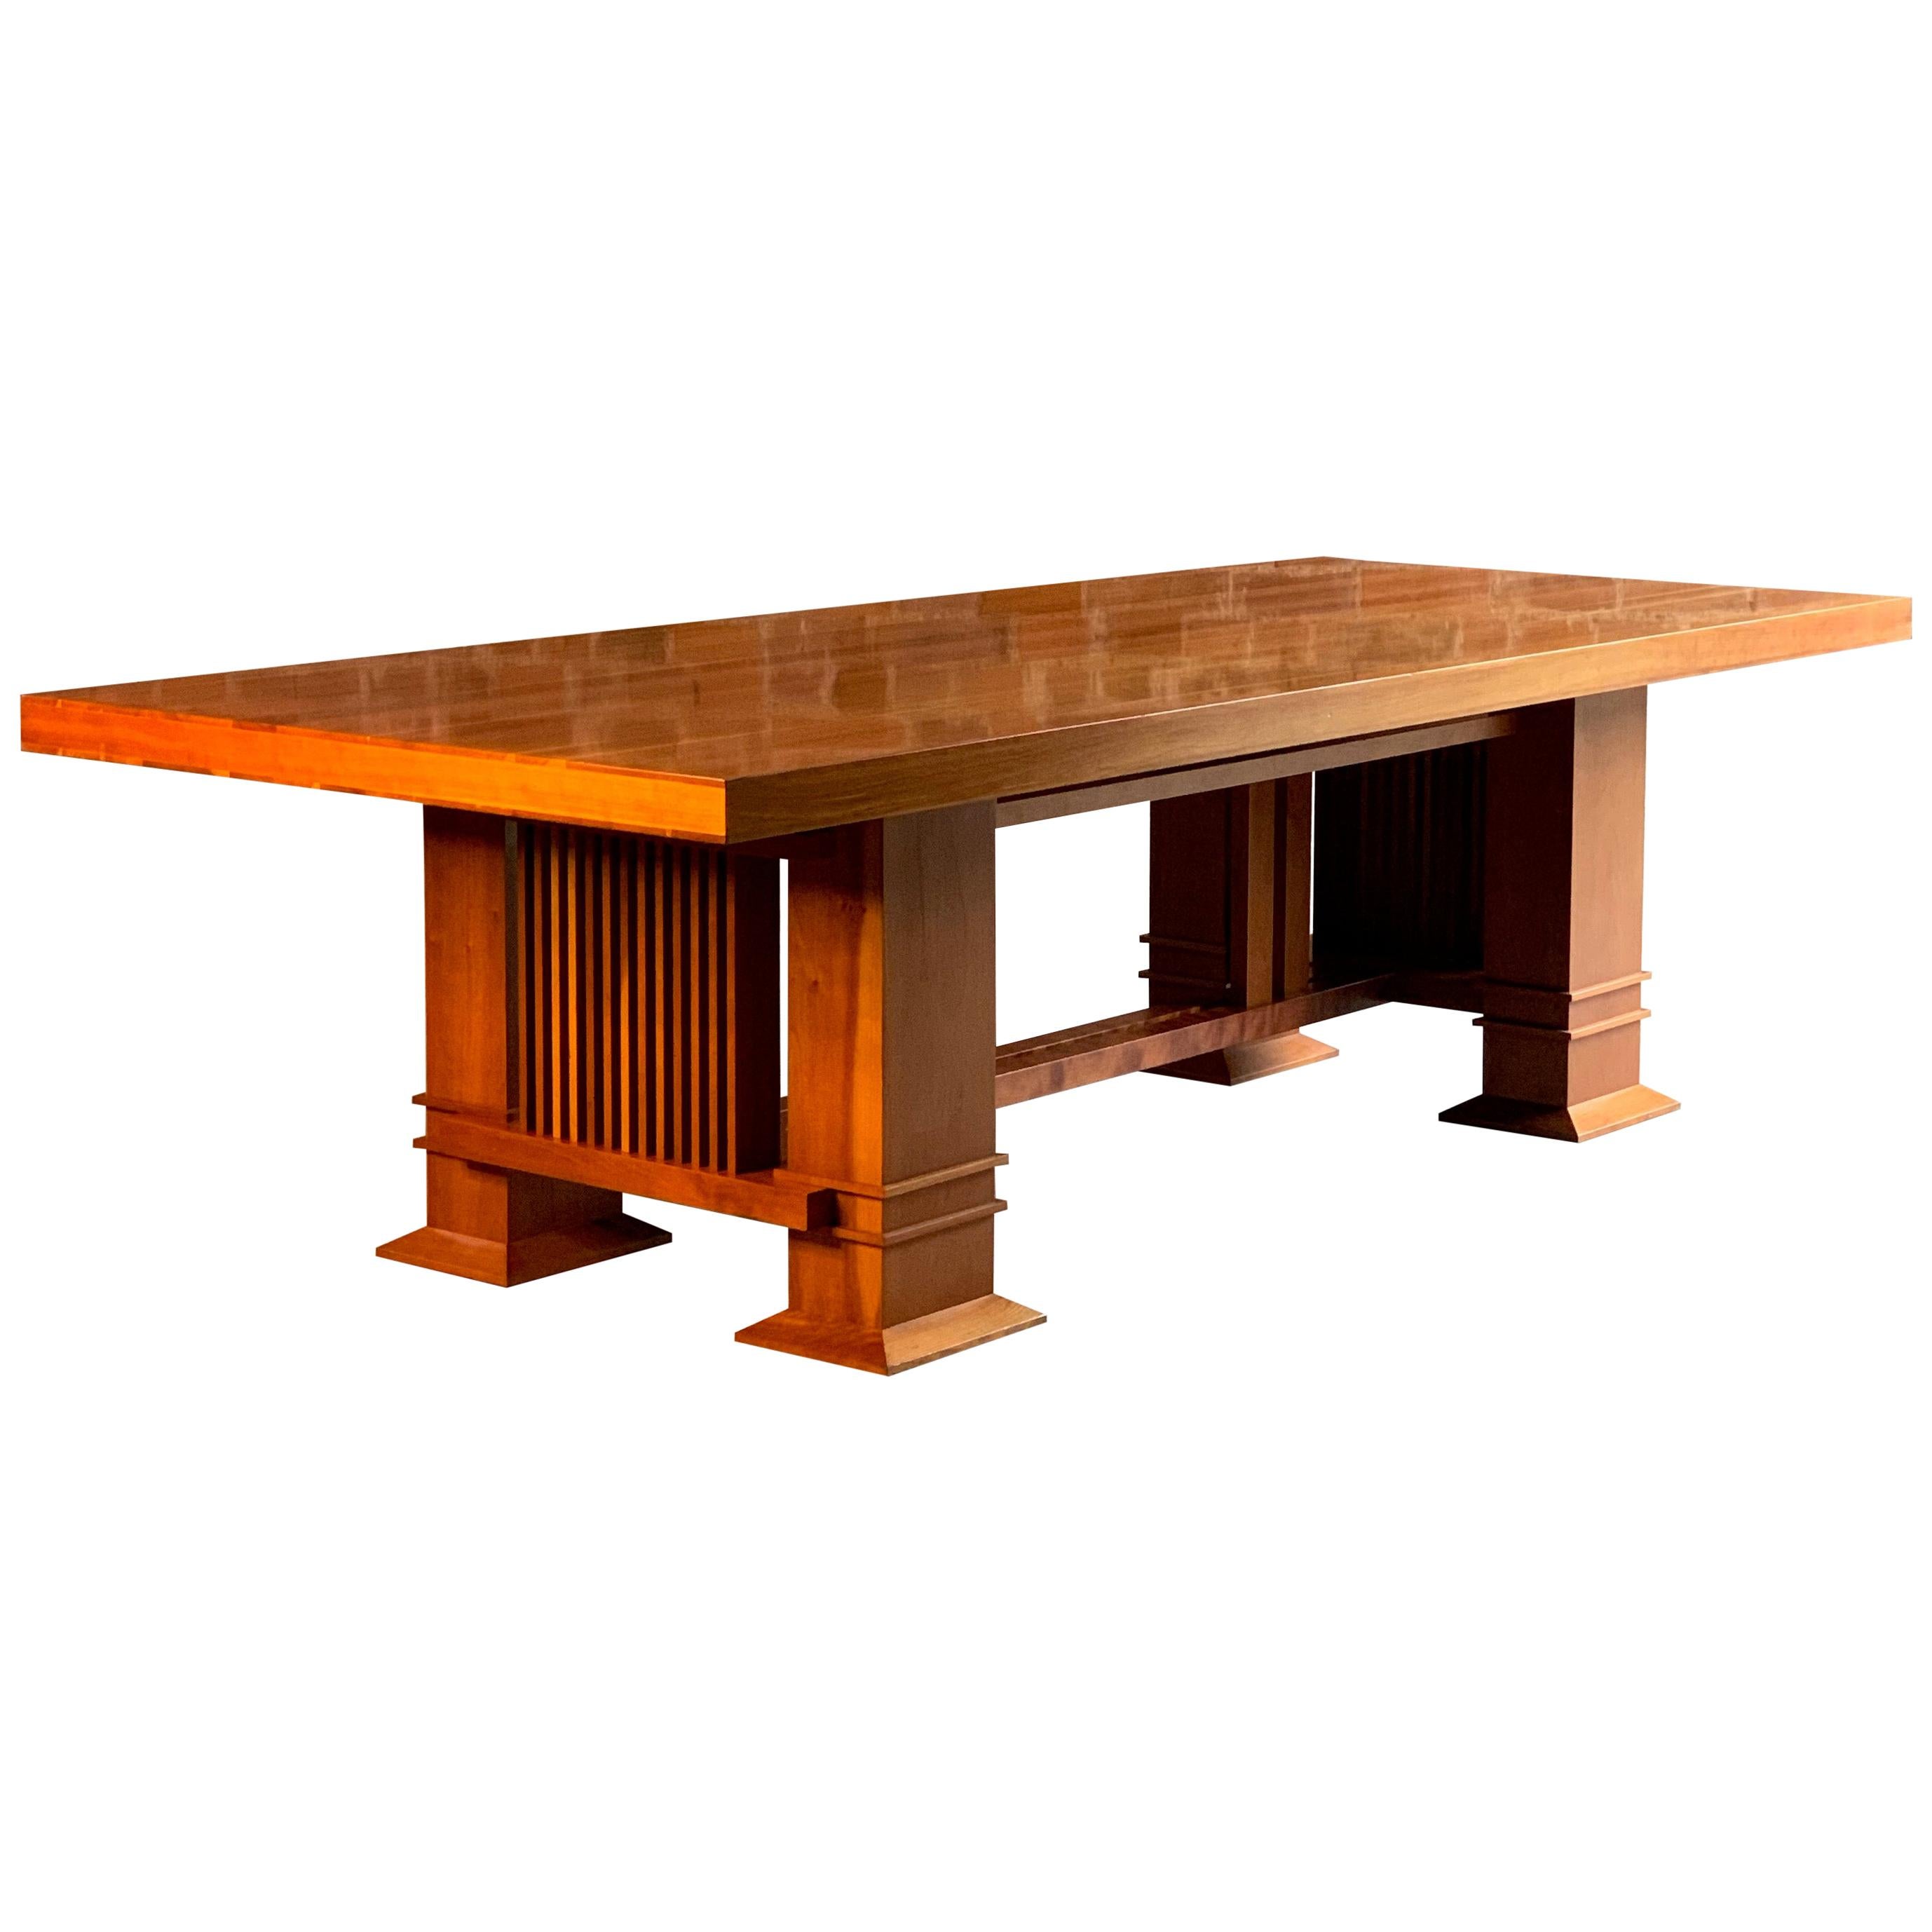 Frank Lloyd Wright 605 Allen Table in Cherrywood by Cassina, circa 1980s